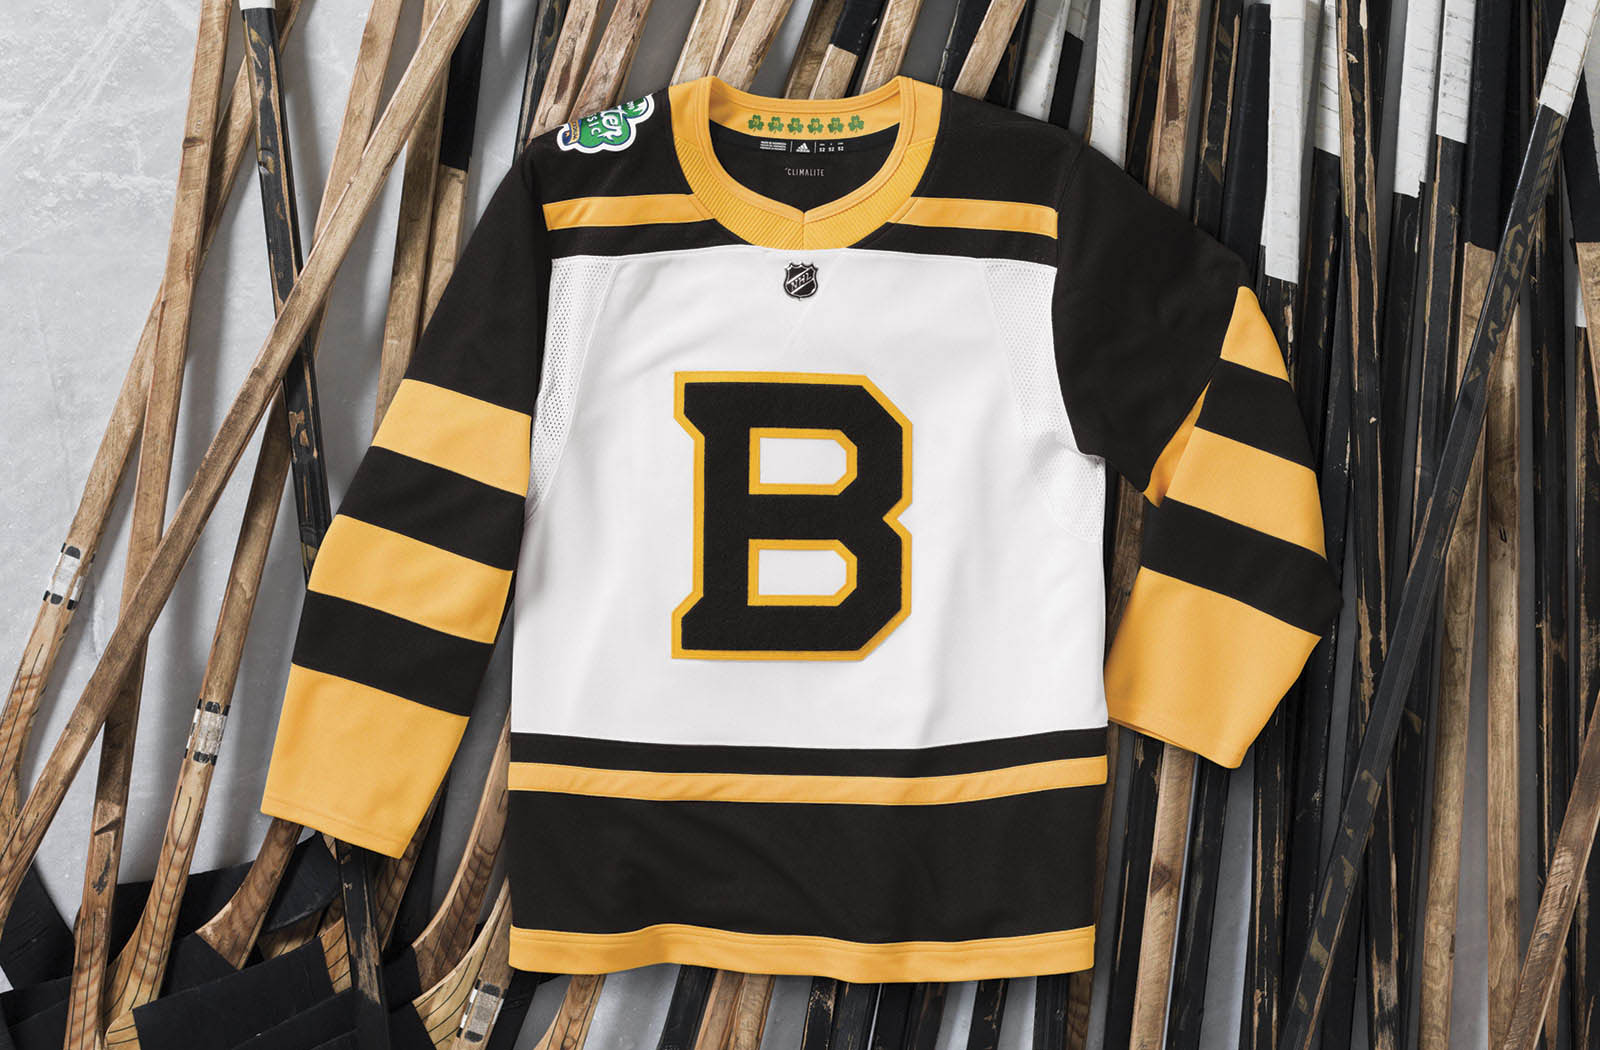 NHL Winter Classic jerseys through the years